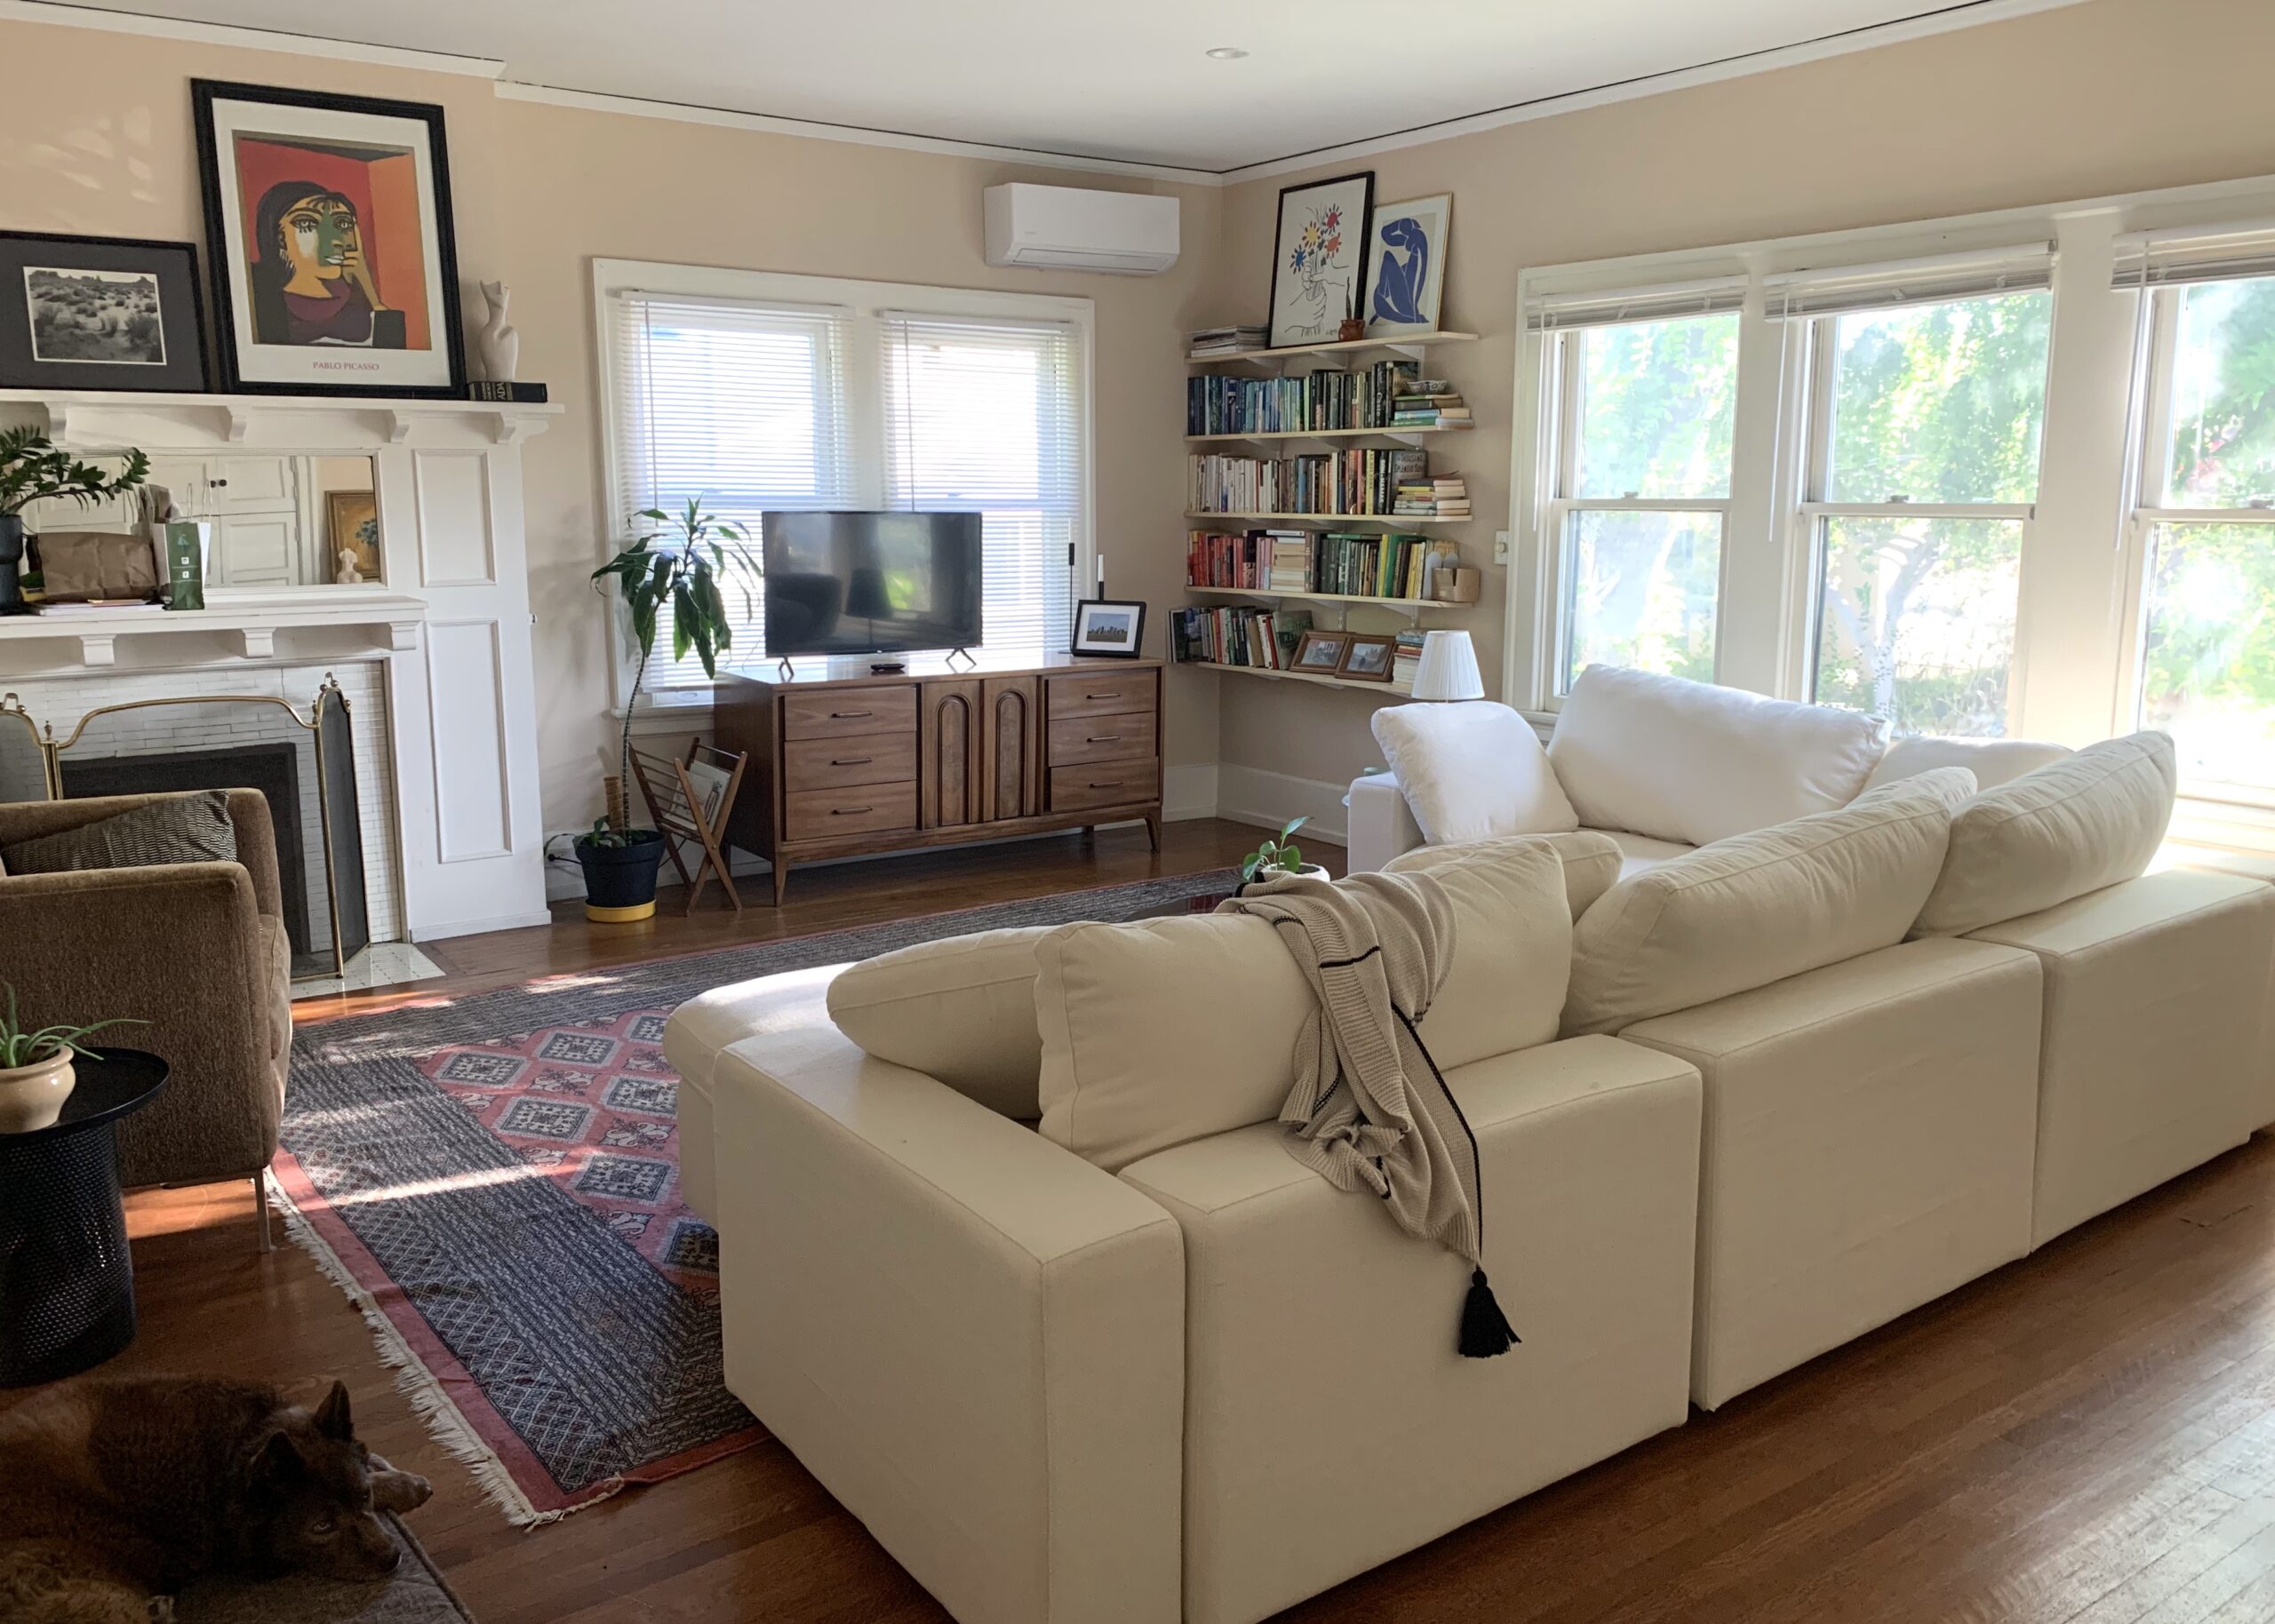 The back of a 7th Avenue 4-seat Modular corner sectional in white, set up in our editor's living room.